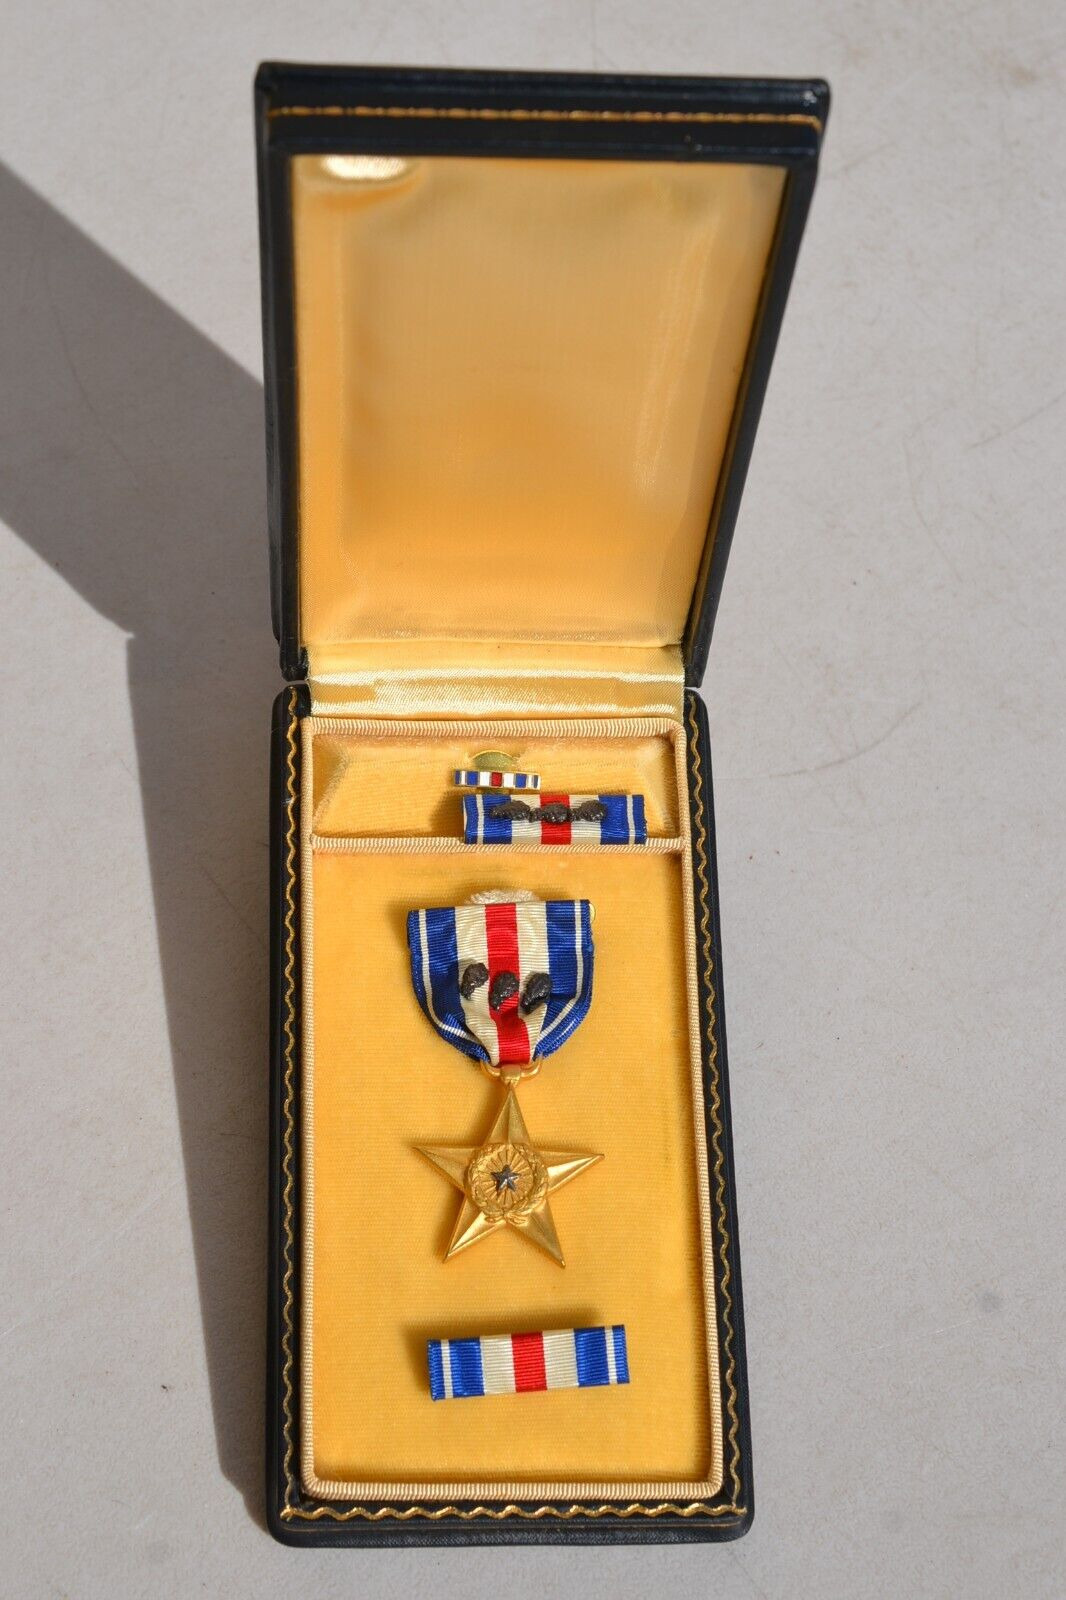 US ARMY WW 2 SILVER STAR, NUMBERED 85133 WITH ISSUE CASE - PIN & RIBBONS